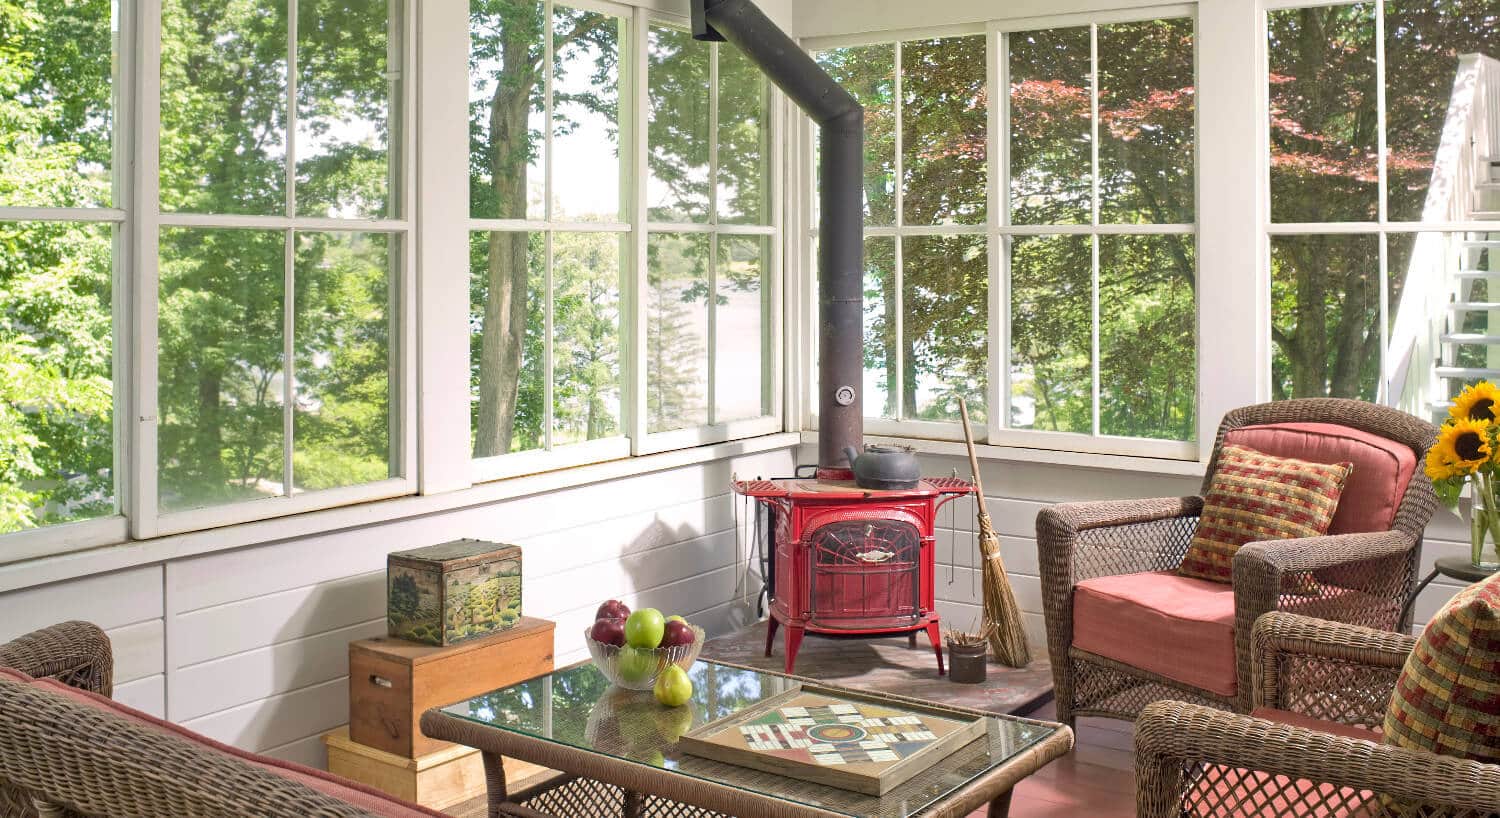 Sunny room with many windows holds cchairs, a table and a red wood stove. 